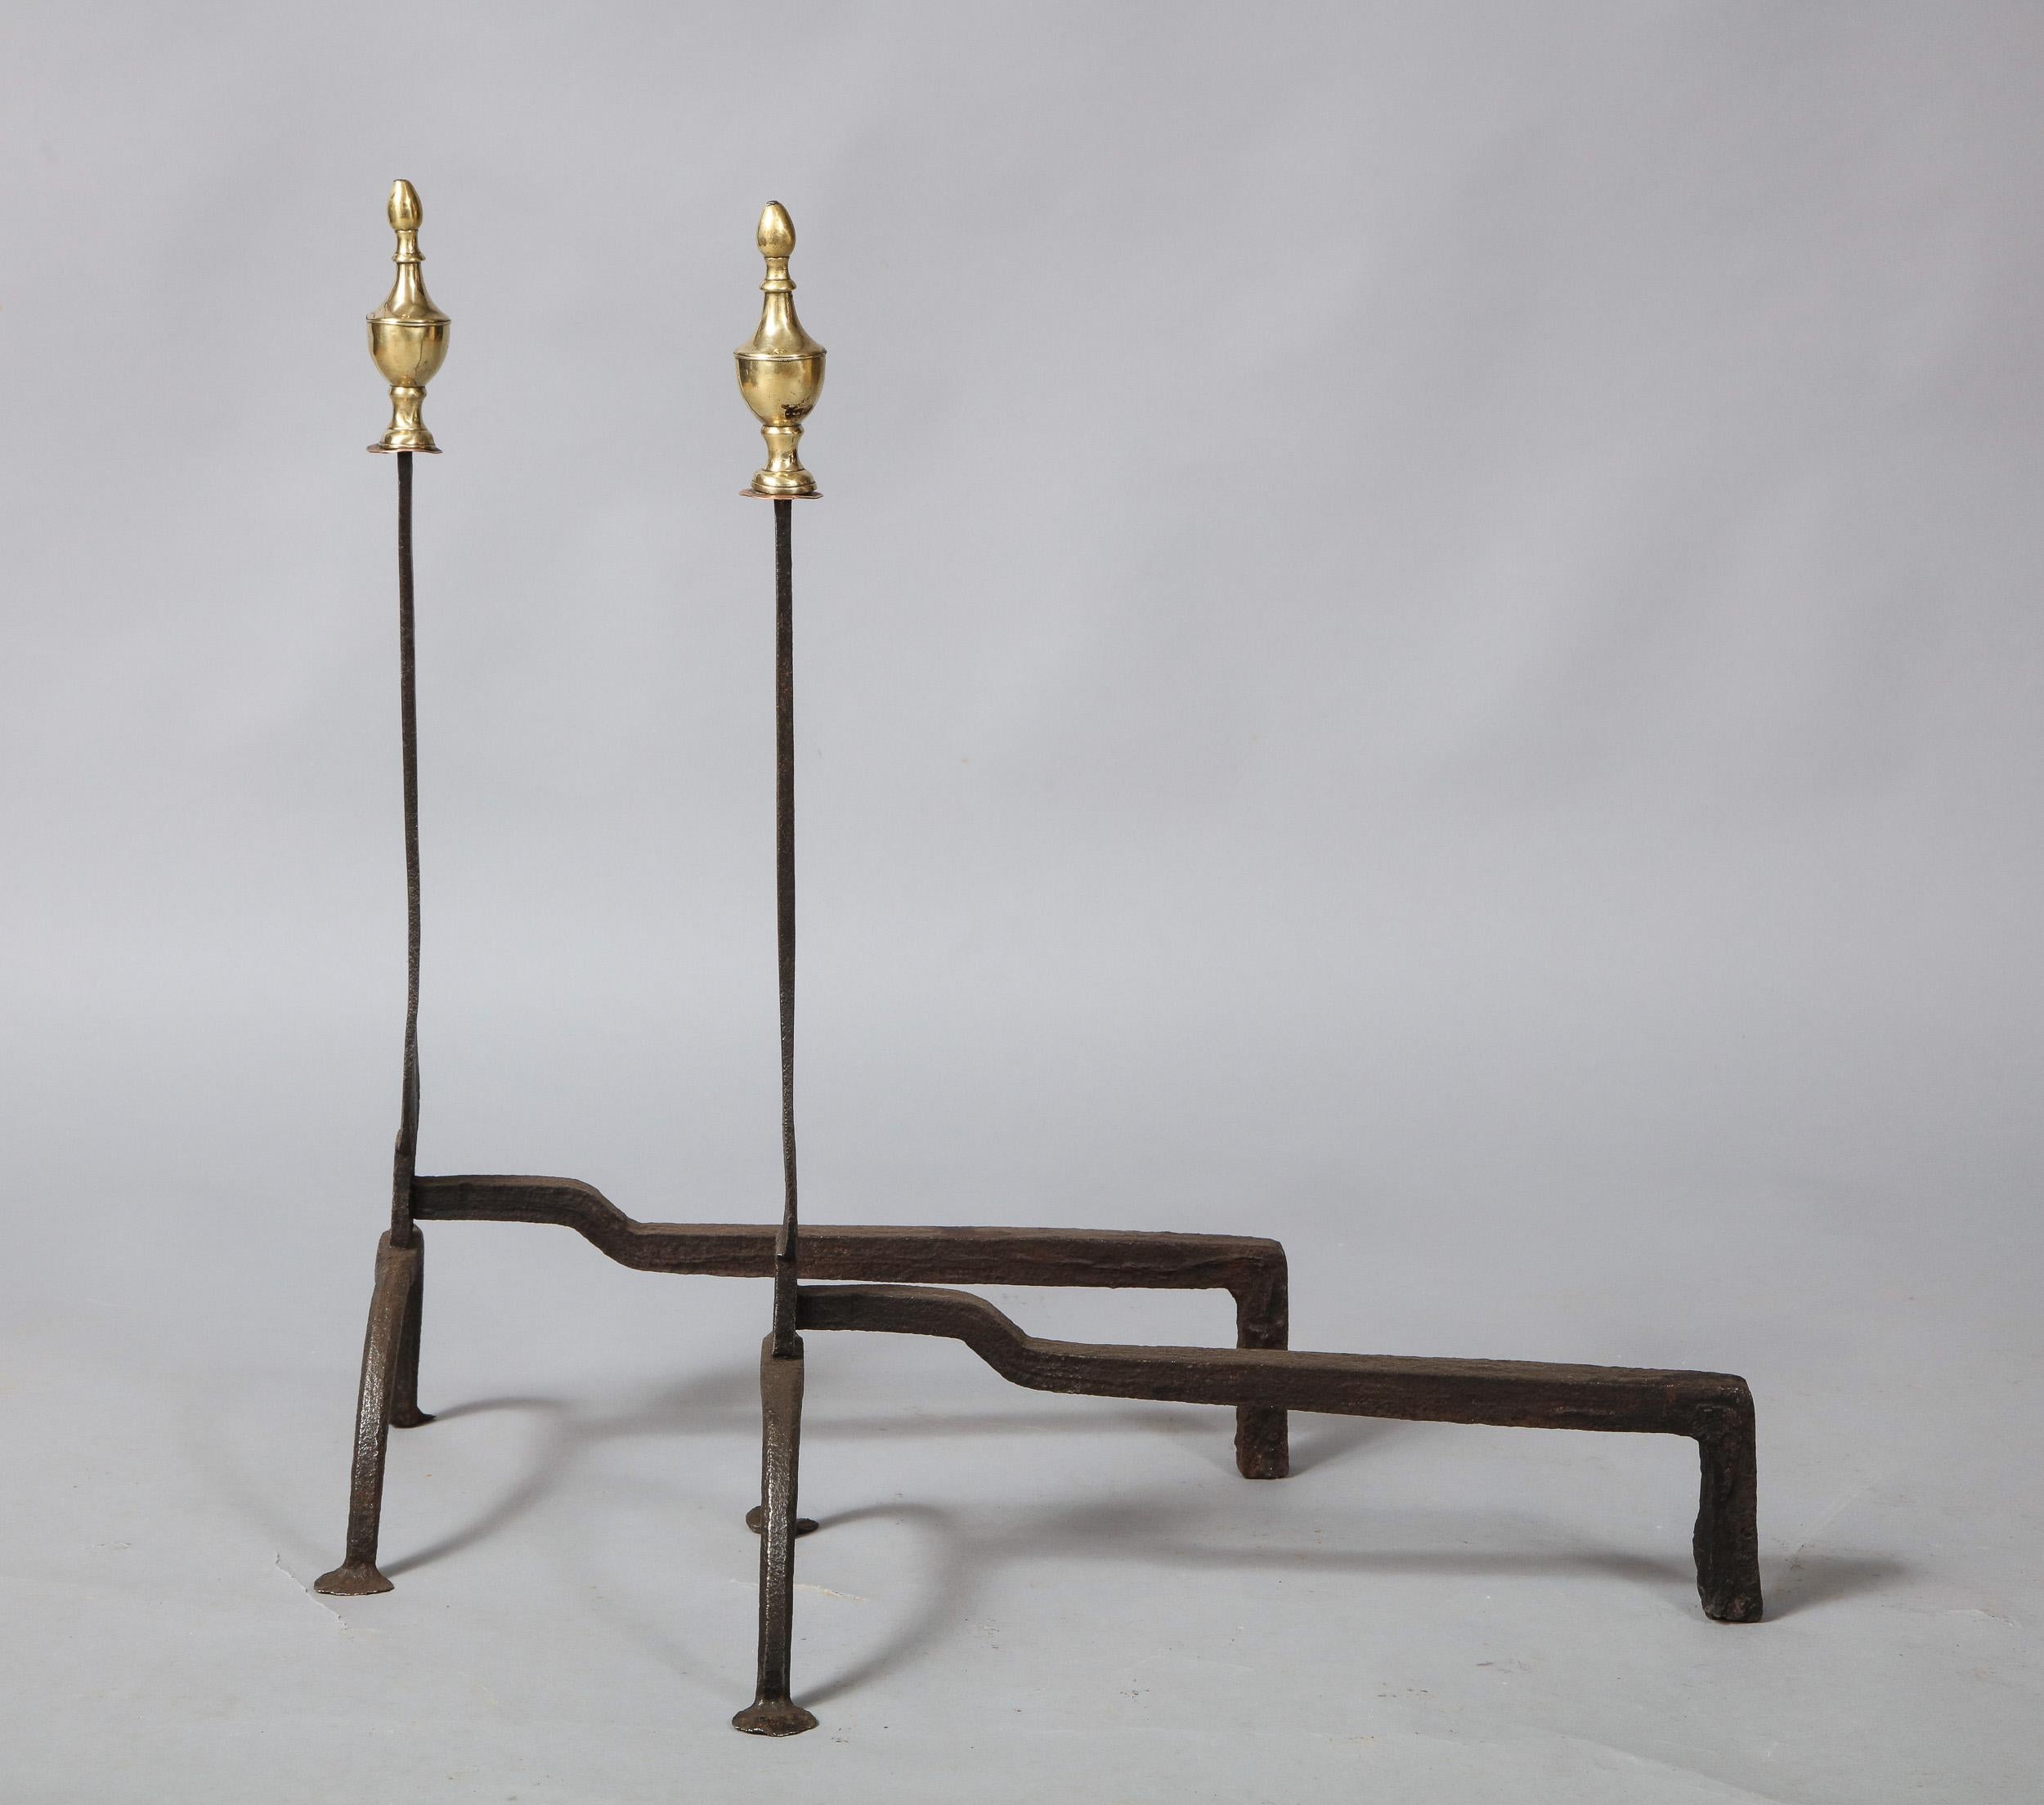 North American Pair of Neoclassical Brass and Iron Andirons